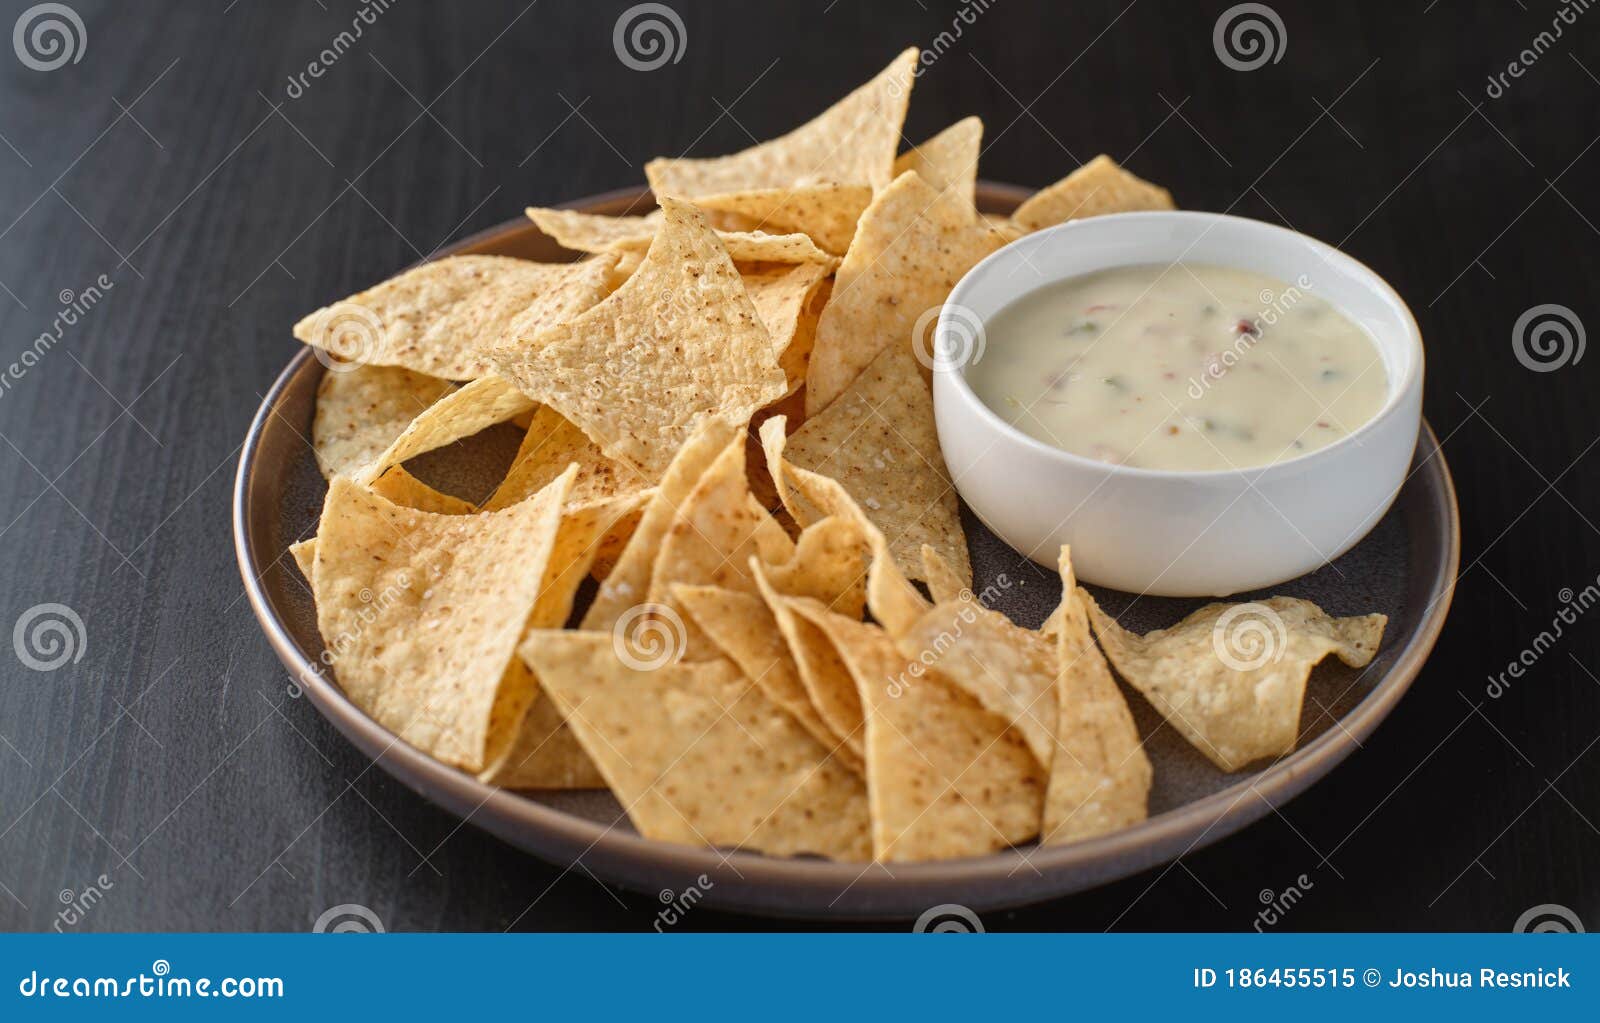 mexican queso blanco cheese dip with corn tortilla chips